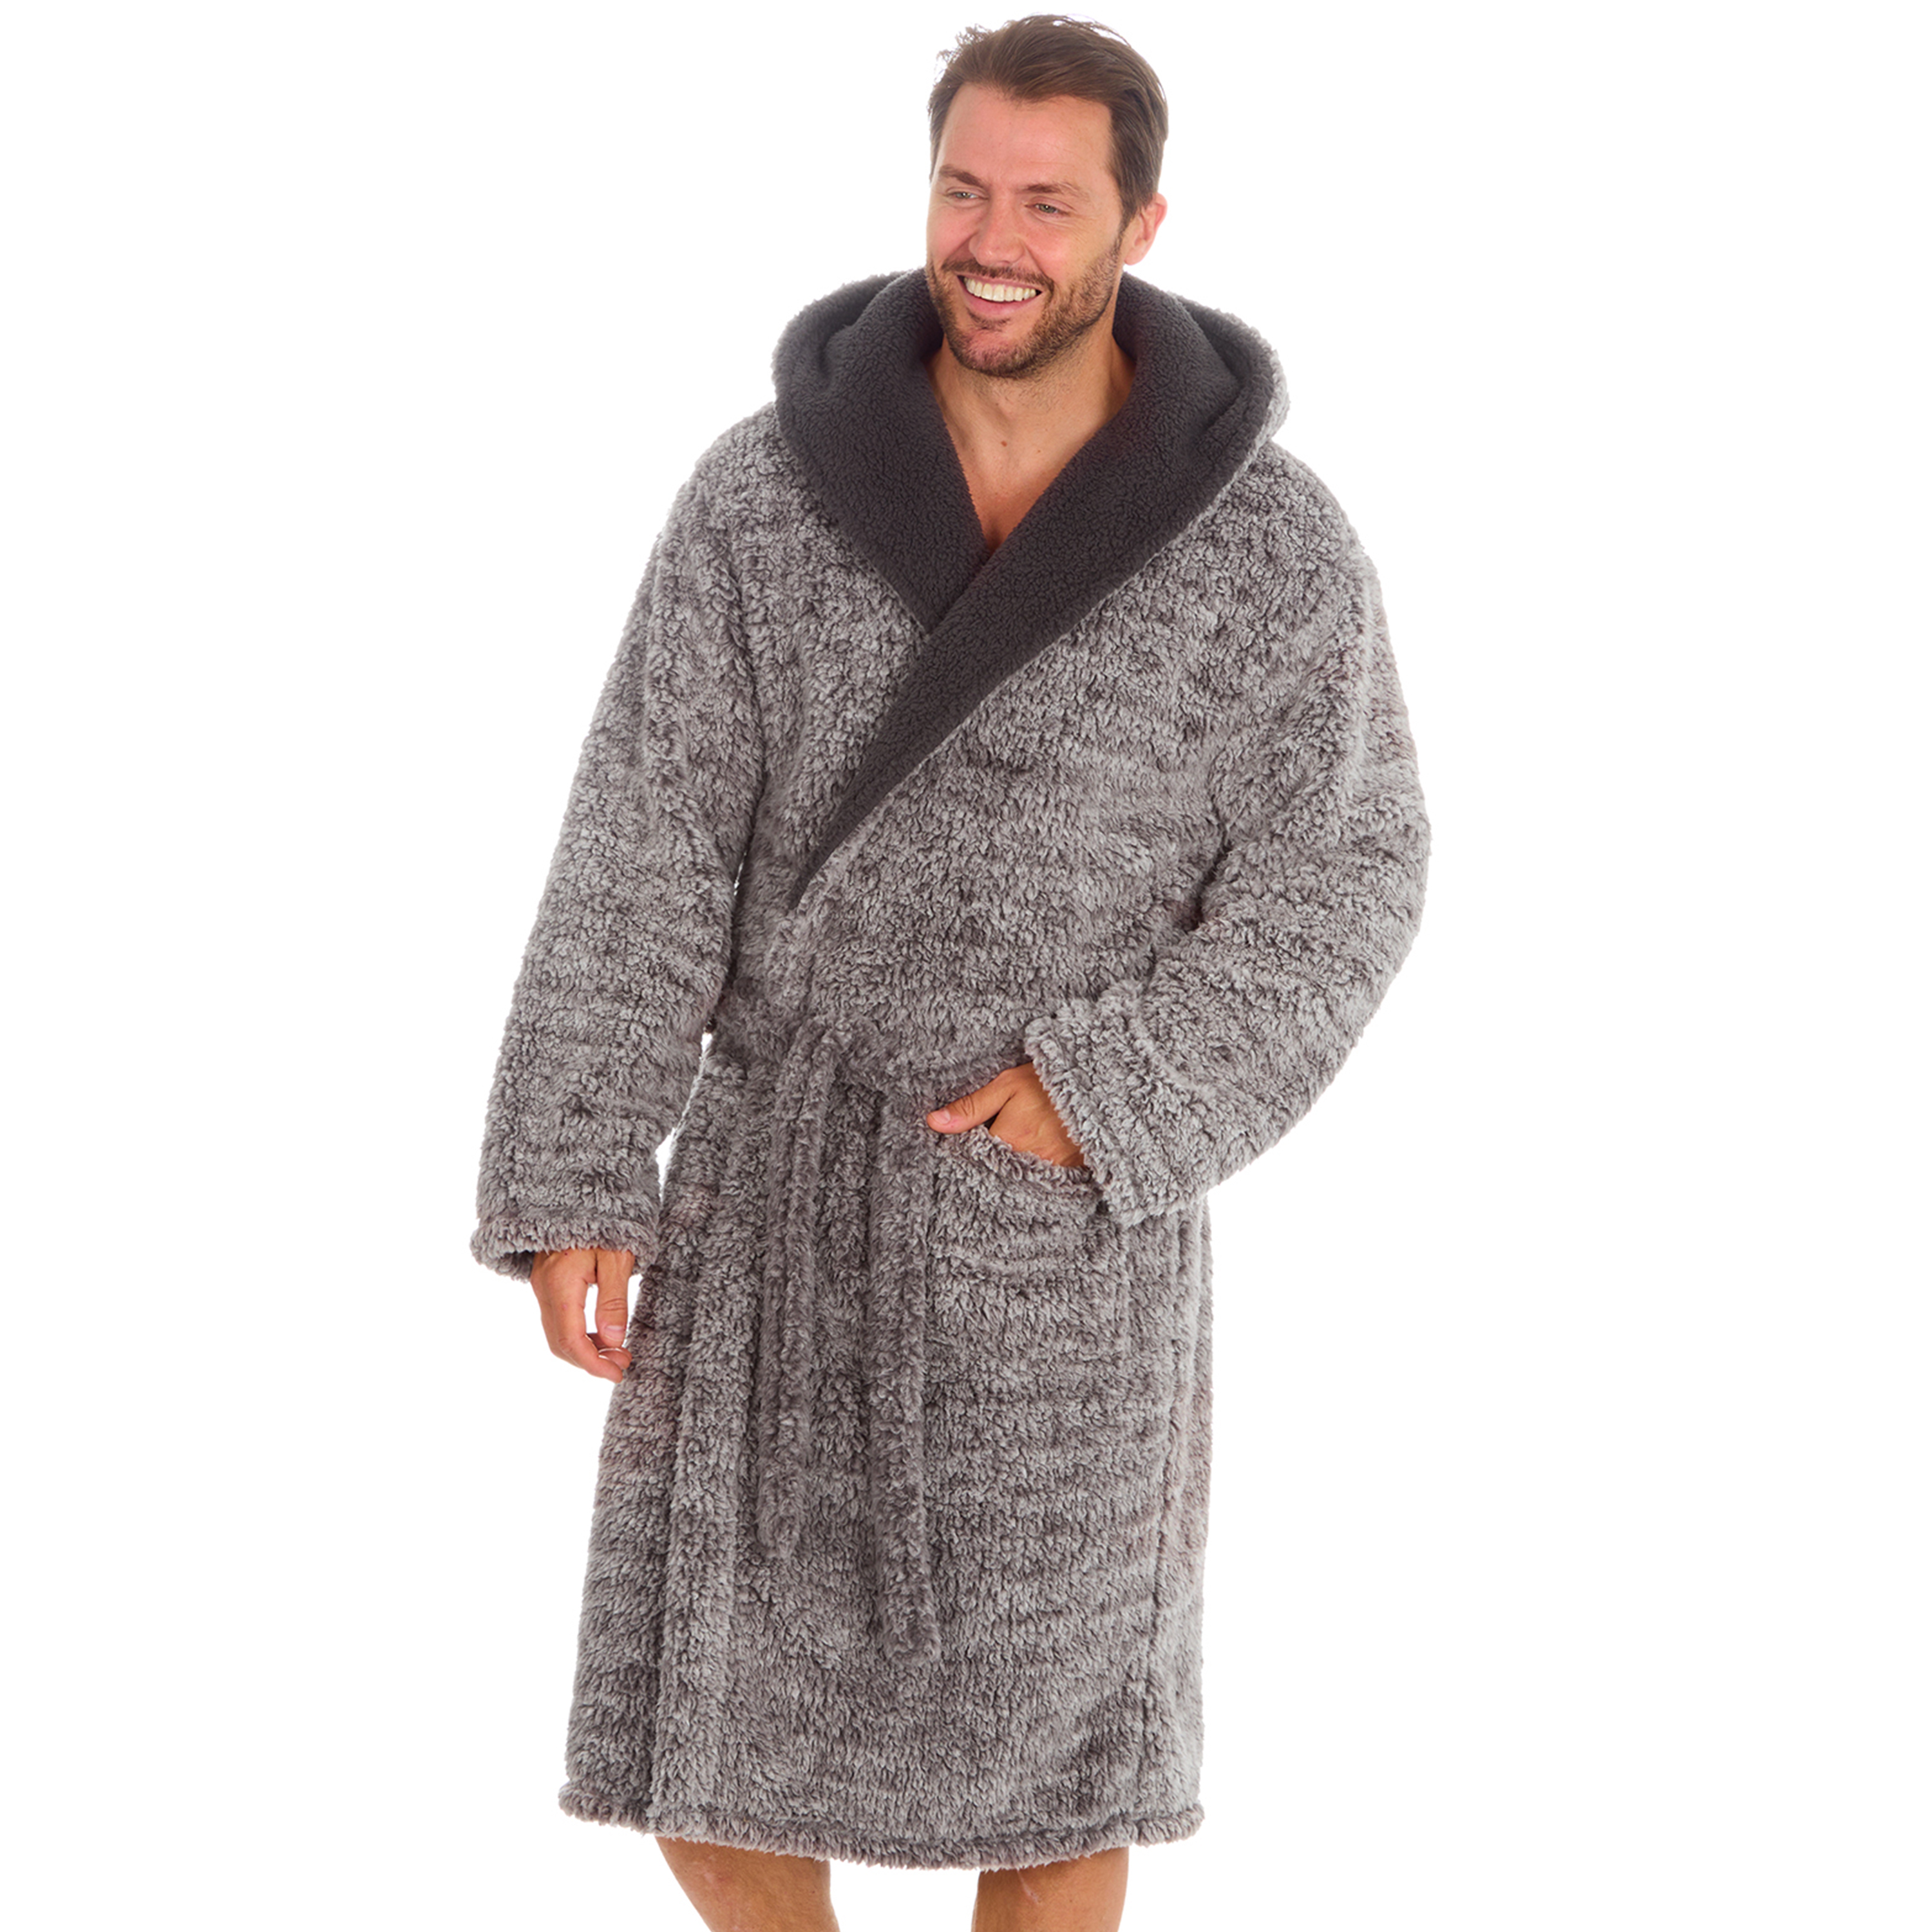 Intimissimi men's robes: dressing gowns, silk, or for winter